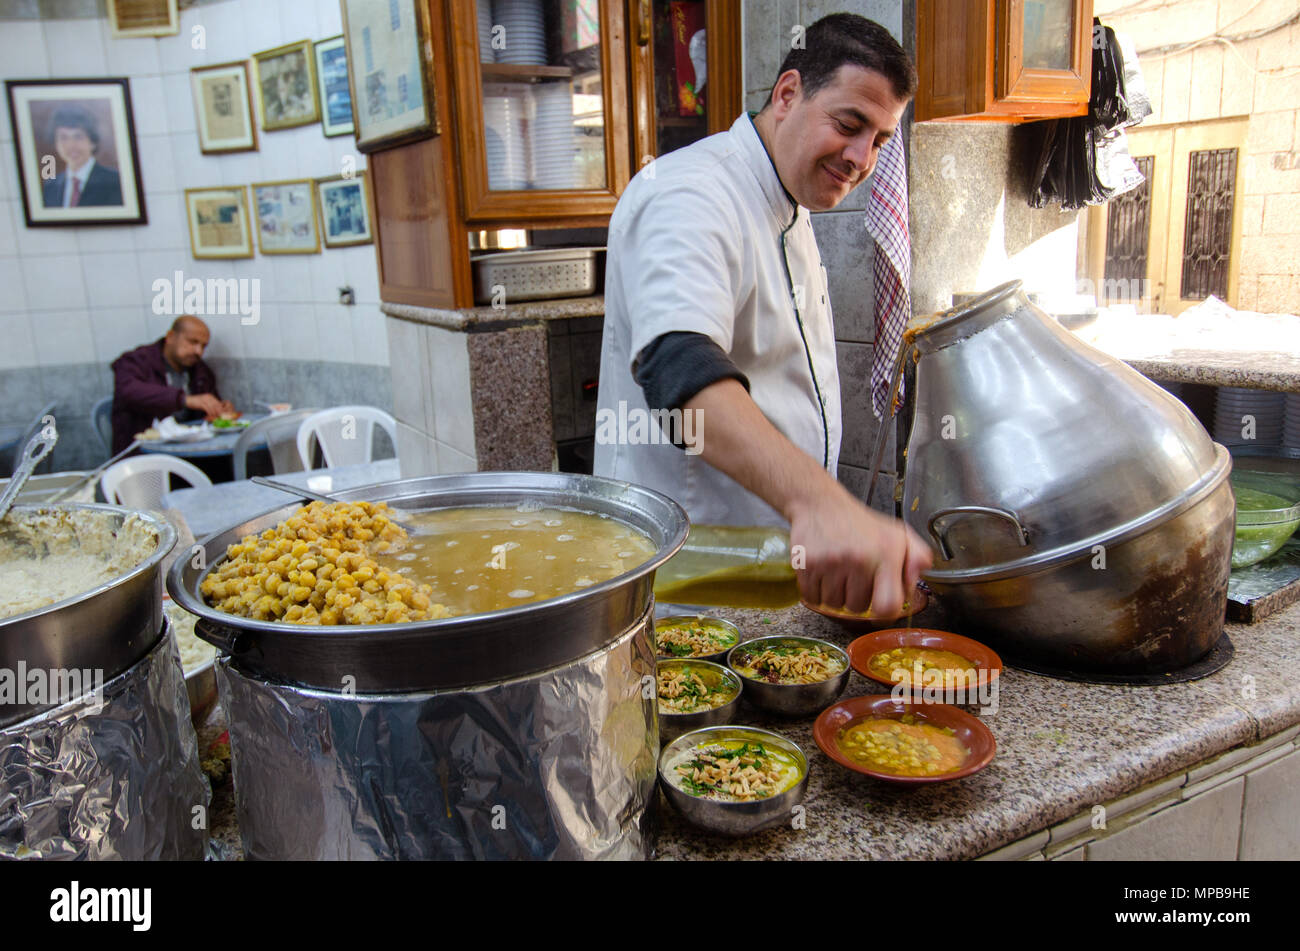 Hashem Restaurant, downtown Amman, Jordan. Fuul, Falafel and Hummus being prepared at the legendary eatery. Stock Photo